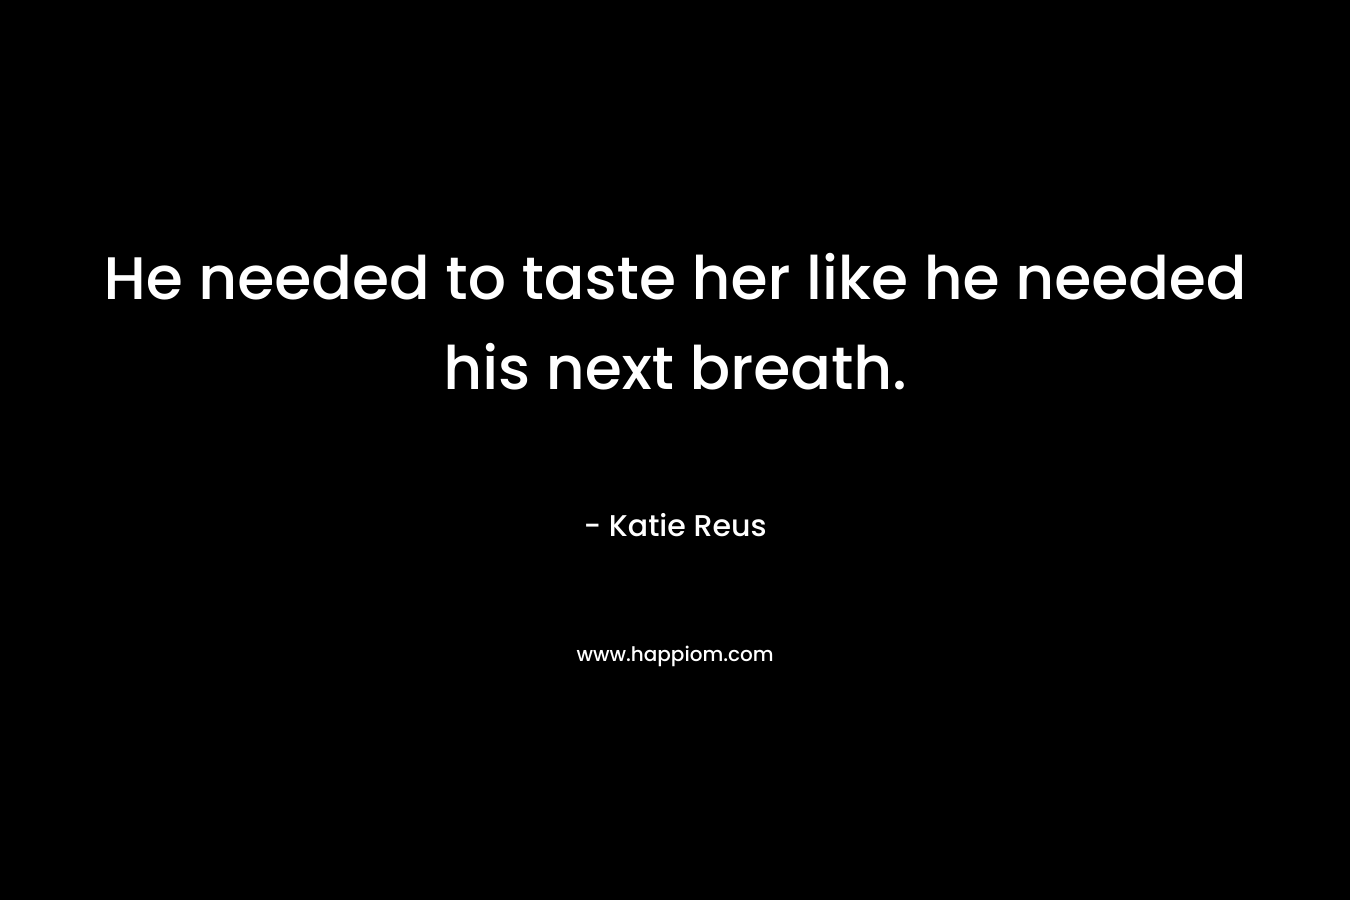 He needed to taste her like he needed his next breath.